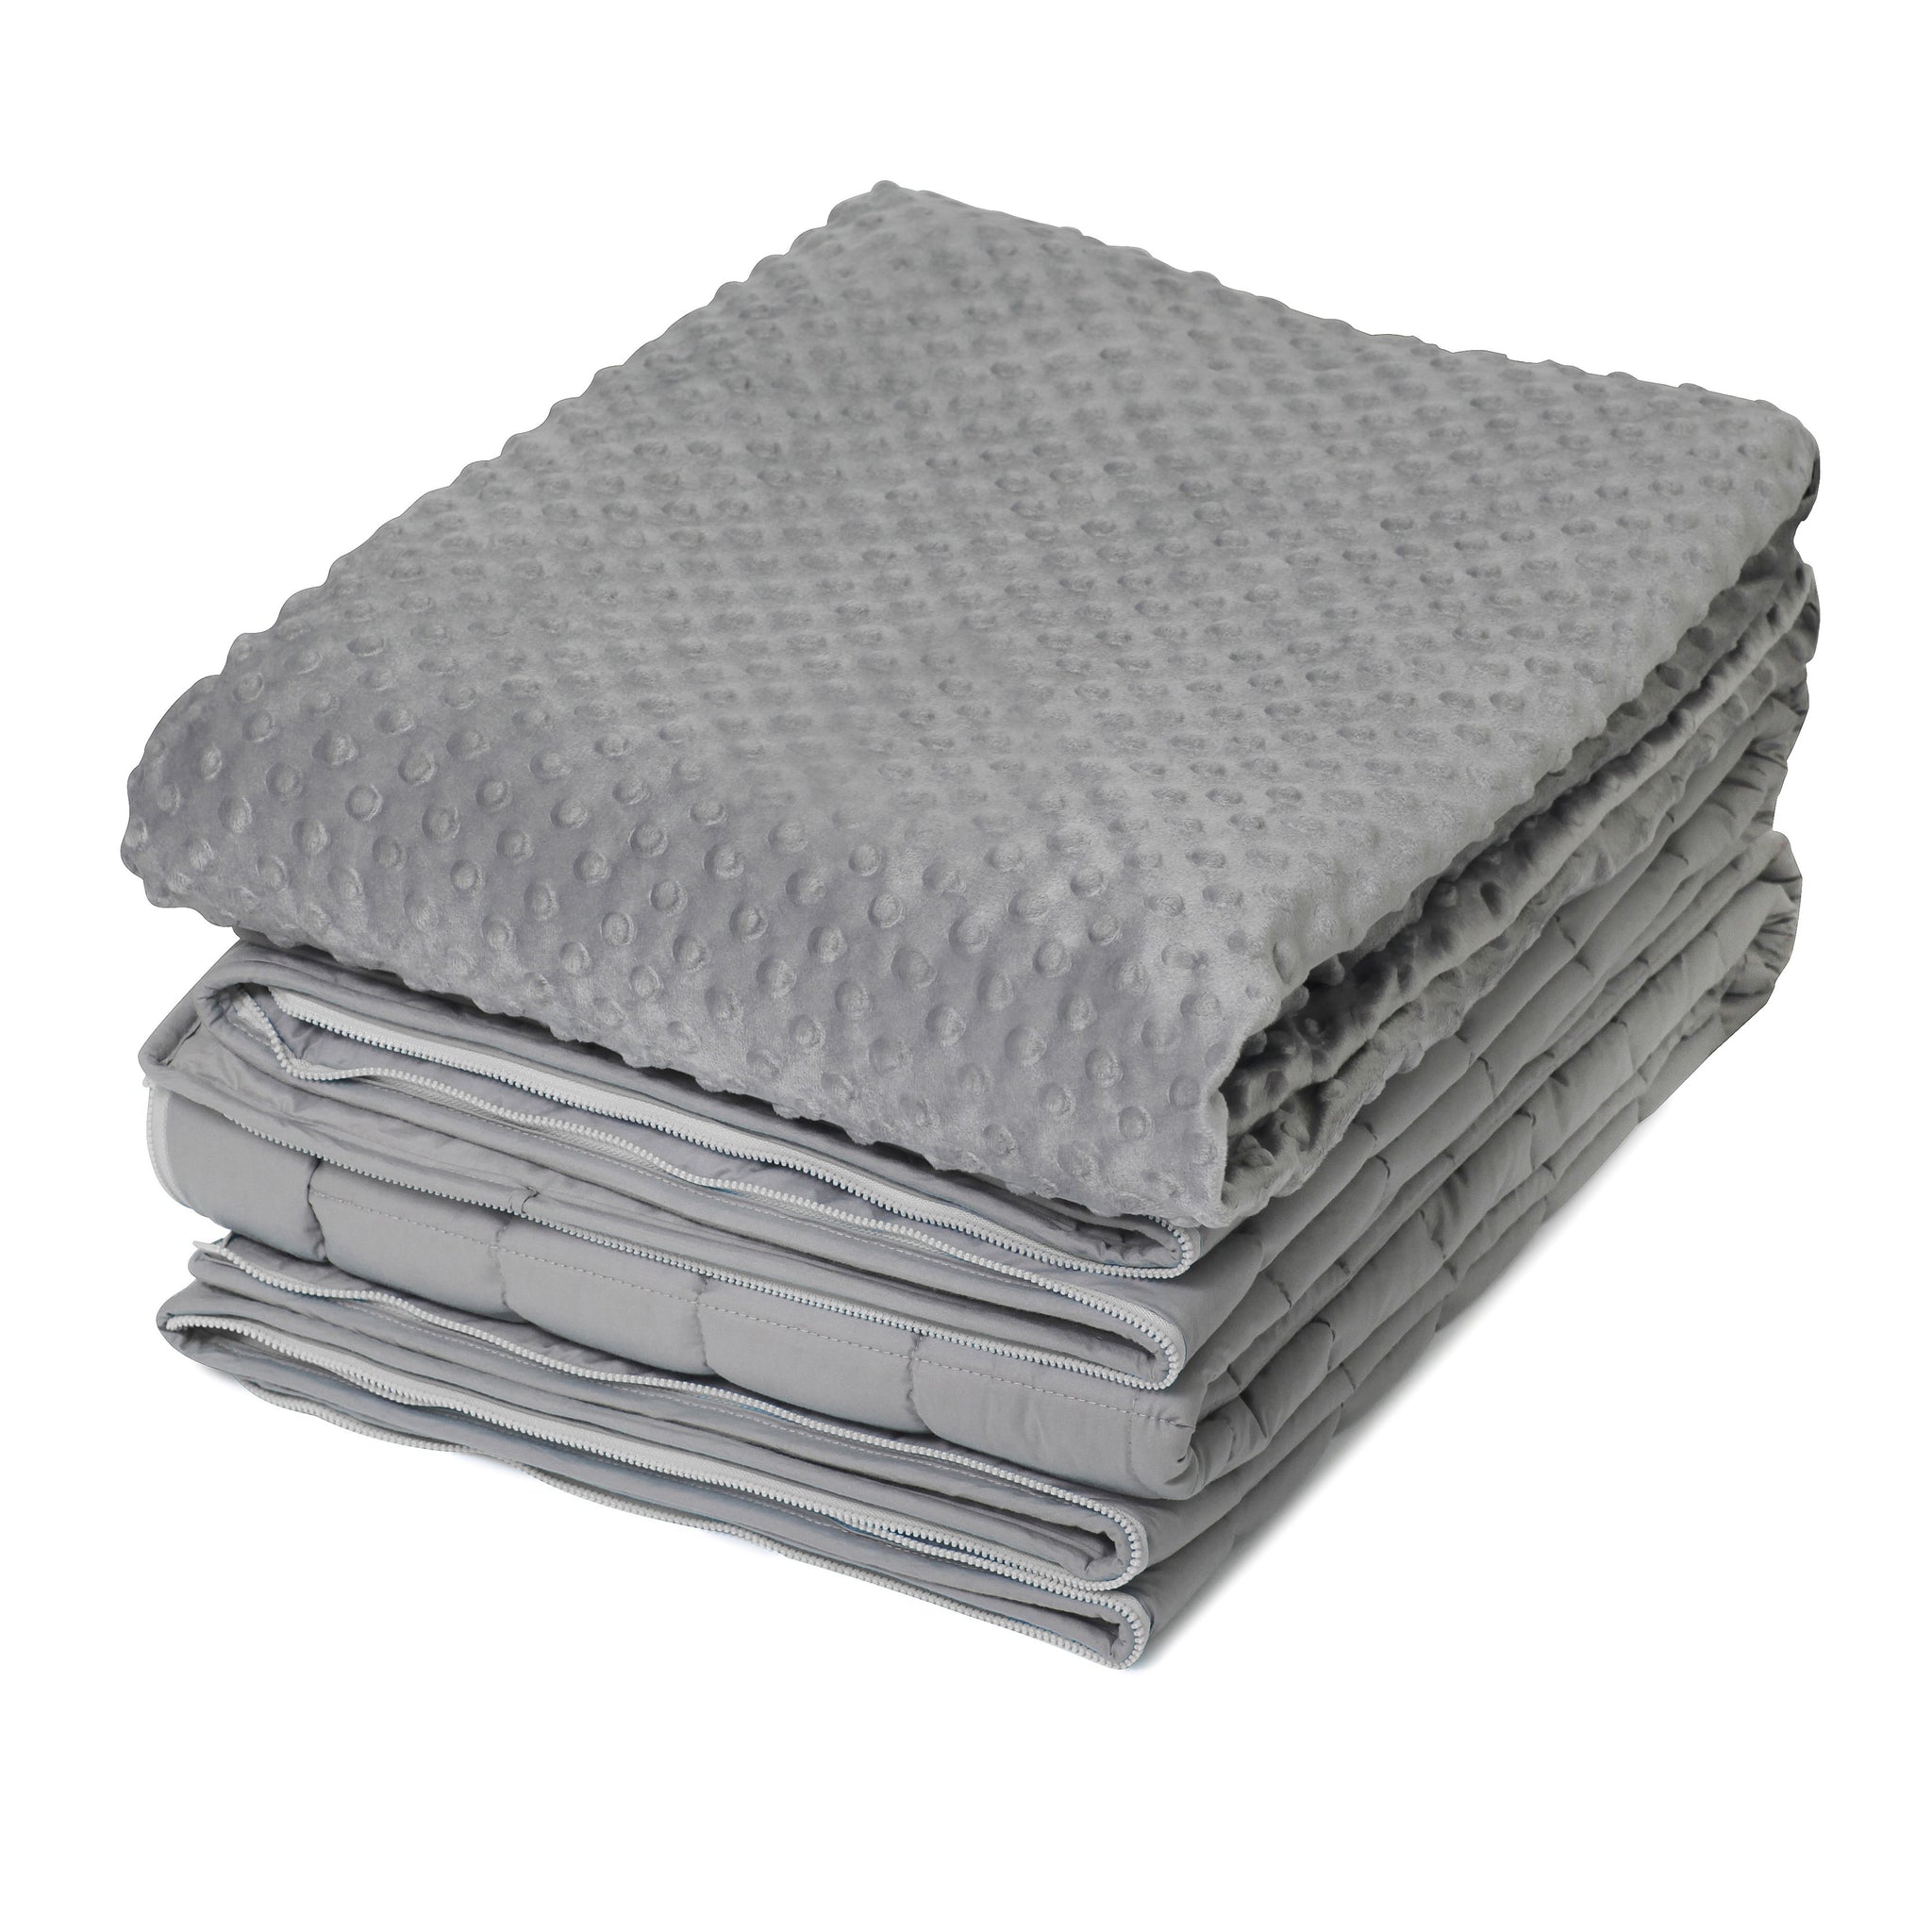 Buy Perfect Size Weighted Blanket For Adults &Kids - properlivingco